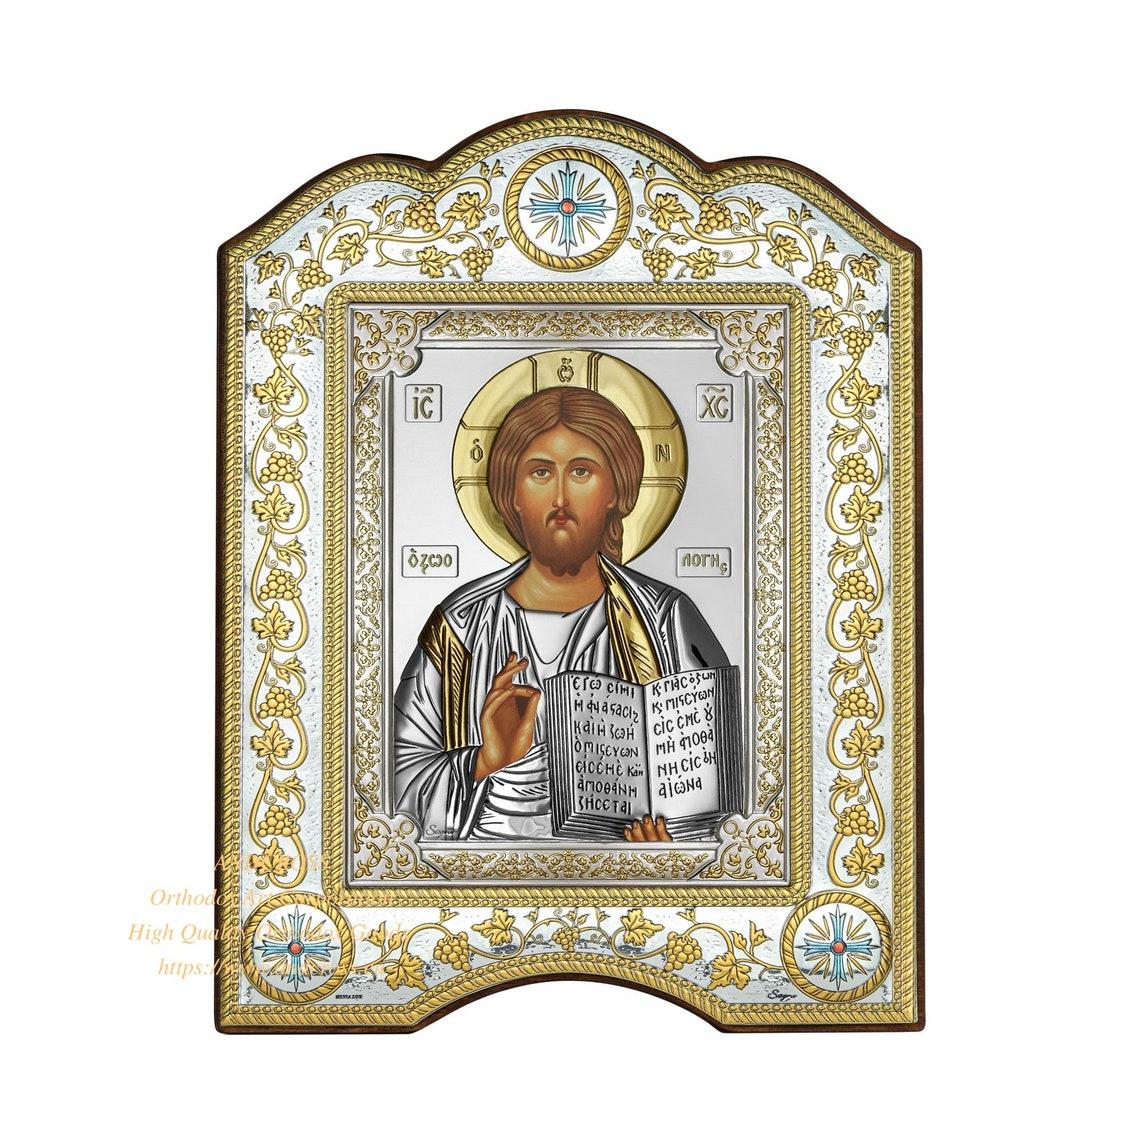 The Great Miraculous Christian Orthodox Silver icon- Christ Pantocrator 21×28 Gold and silver version/Frame with glass. B268|Import placeholder for 27214|Import placeholder for 27214|Import placeholder for 27214|Import placeholder for 27214|Import placeholder for 27214|Import placeholder for 27214